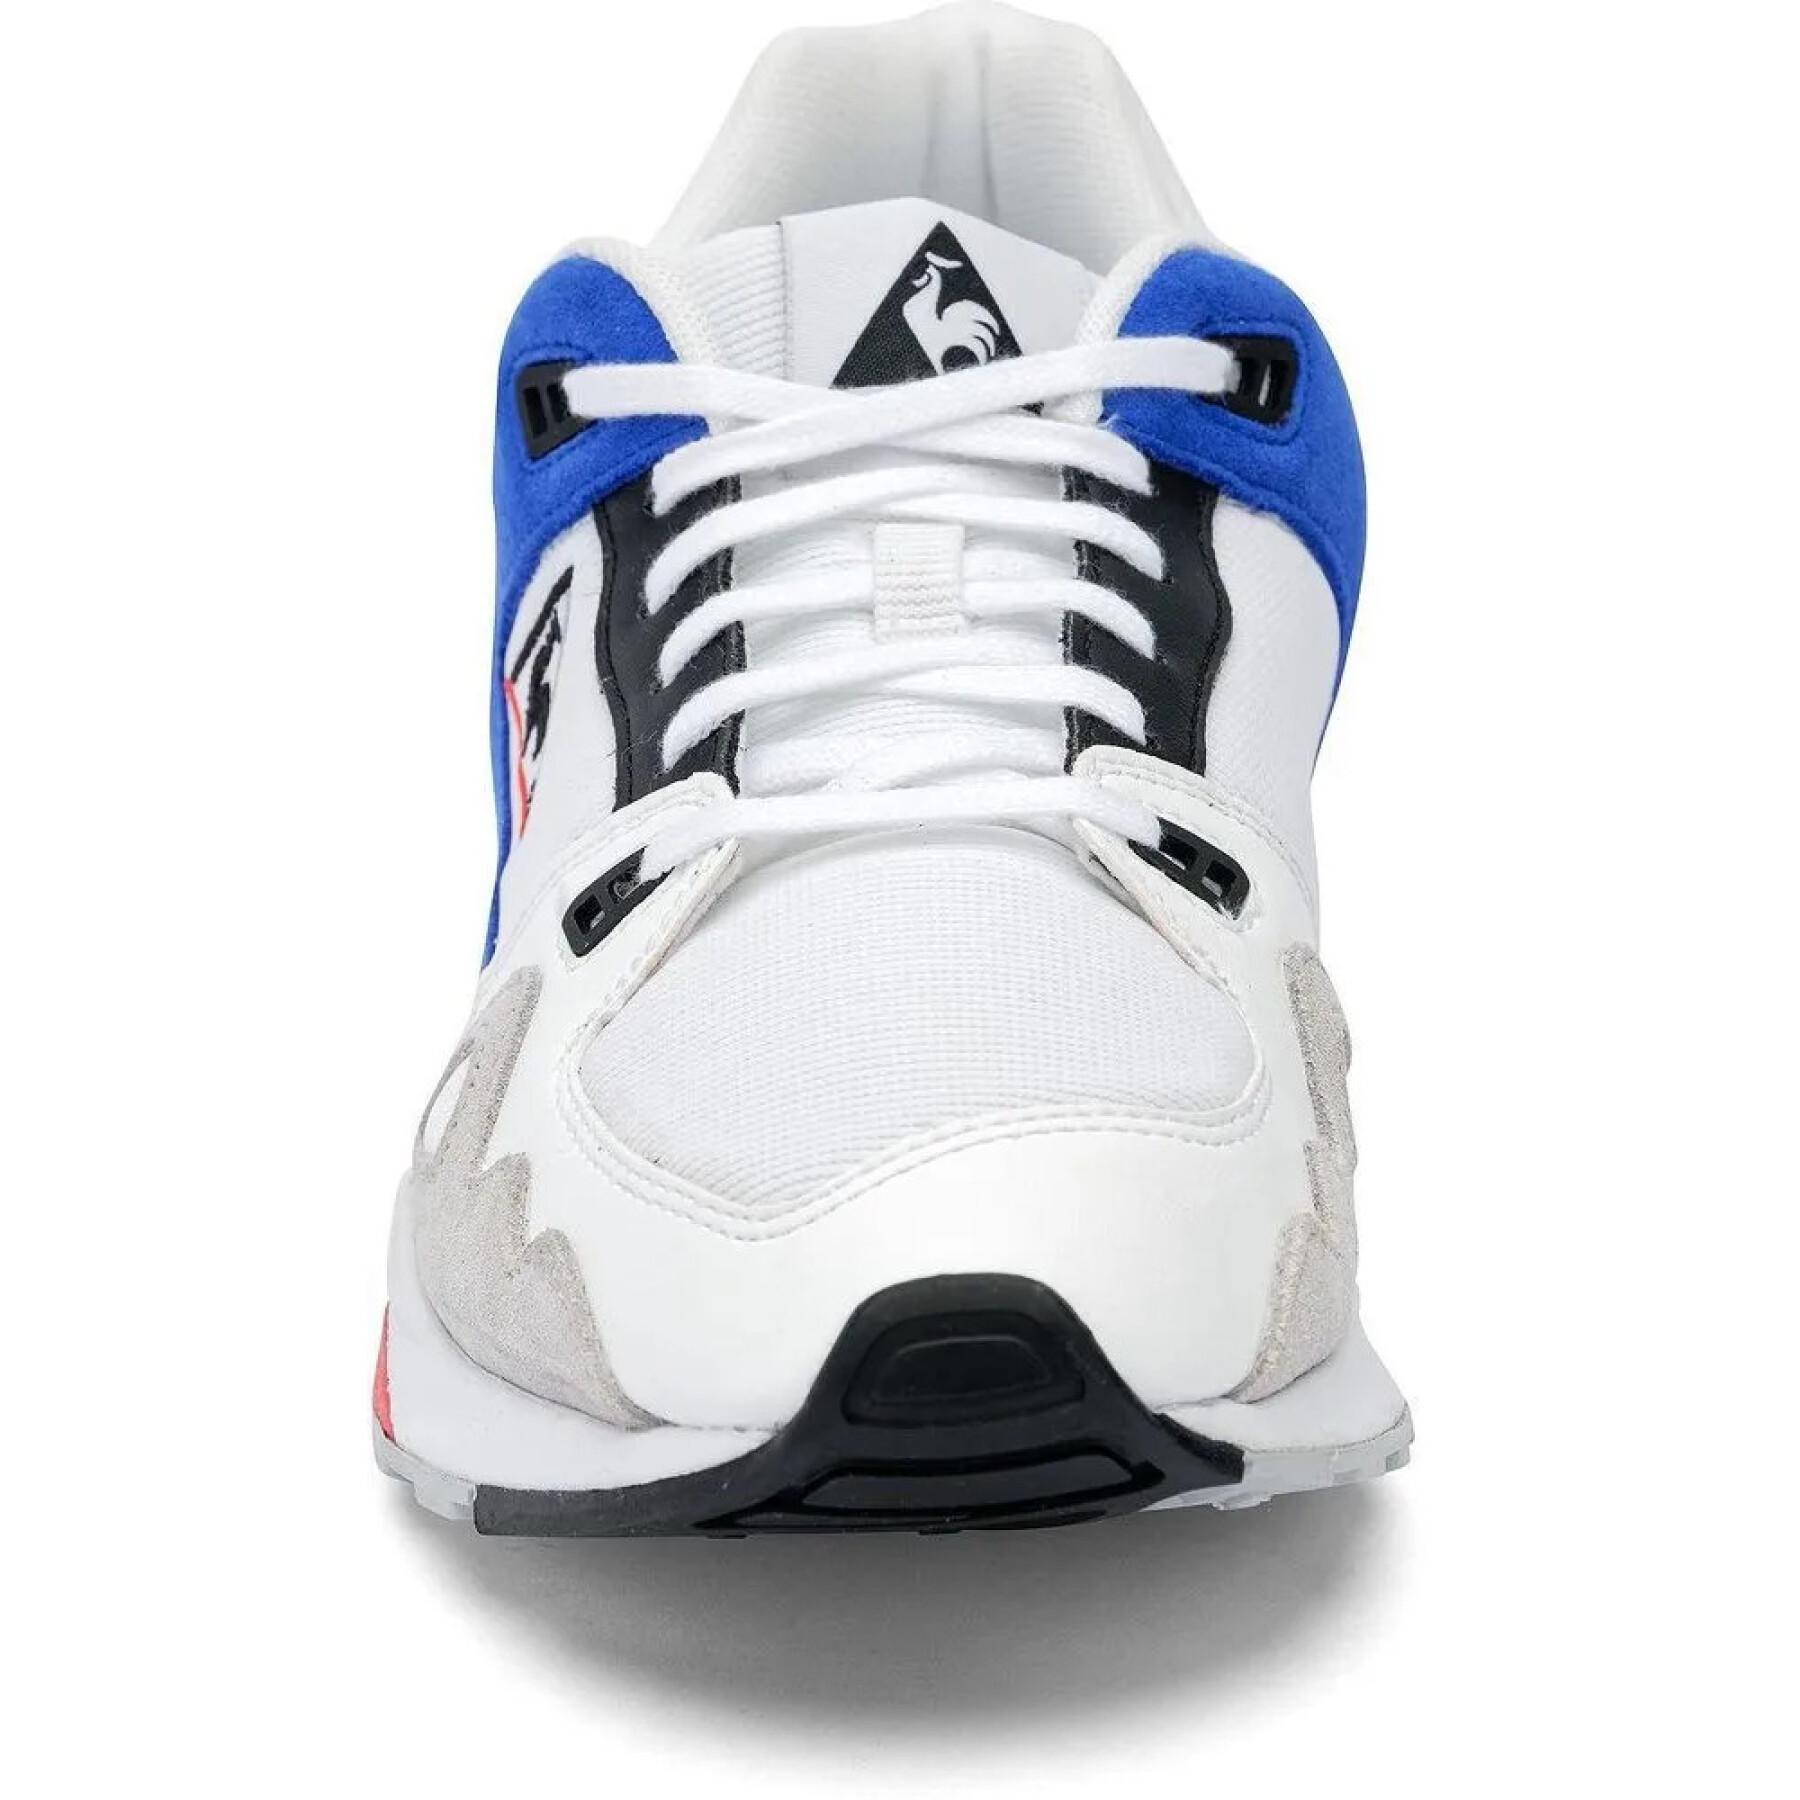 Sneakers Le Coq Sportif LCS R1000 optical